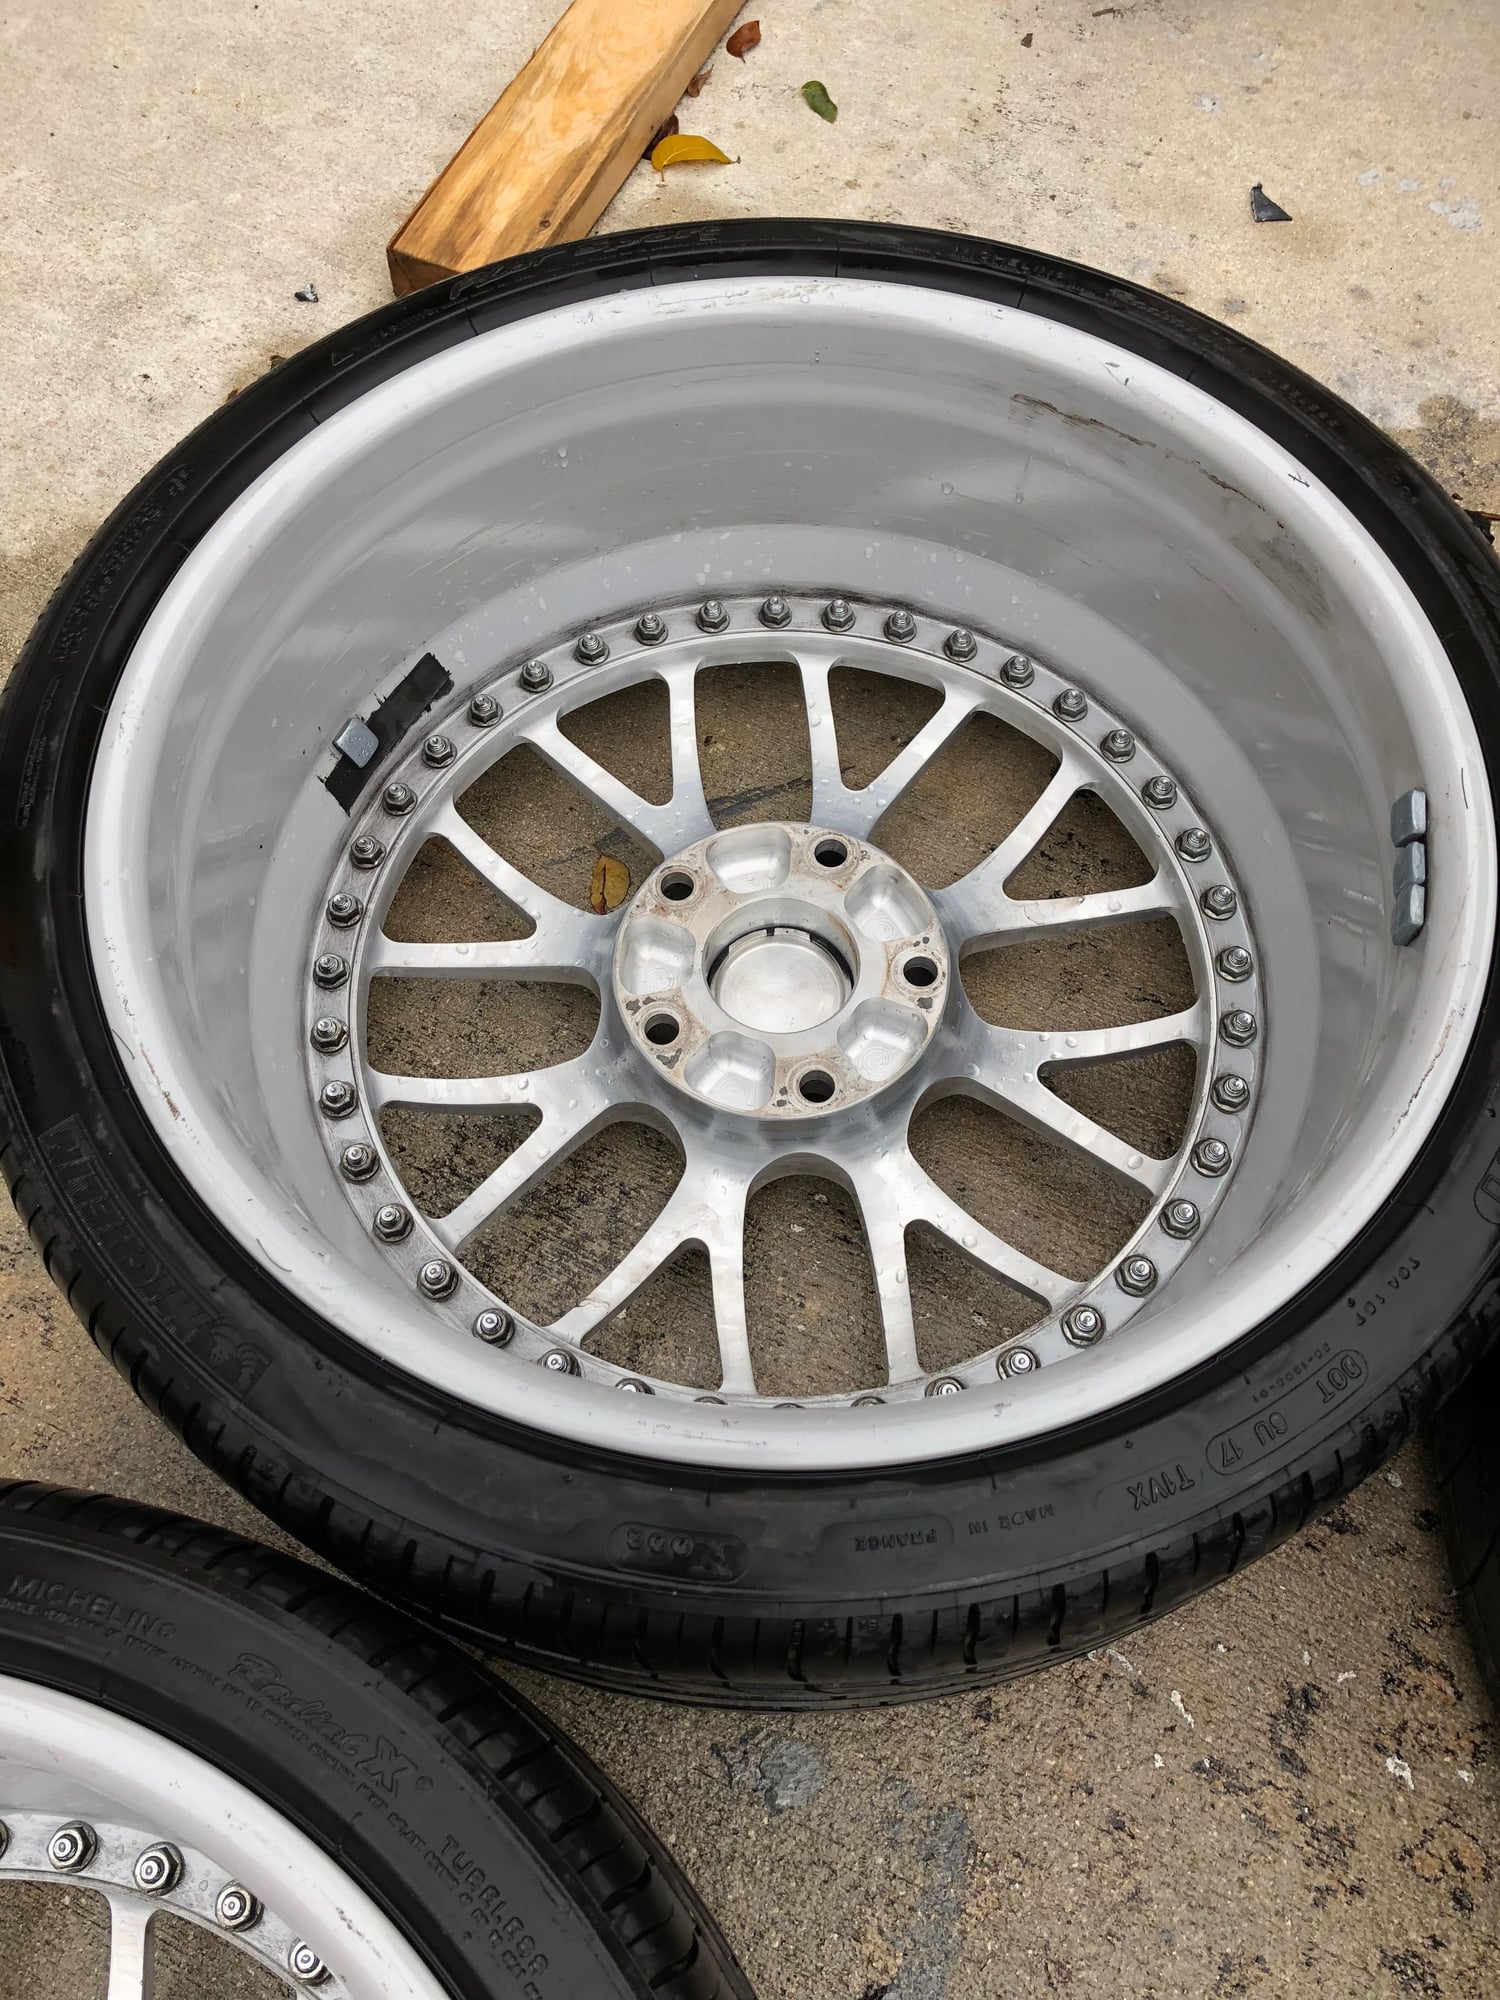 Wheels and Tires/Axles - Strasse SM8 19" wheels - Used - 2001 to 2015 Porsche 911 - Fort Lauderdale, FL 33309, United States